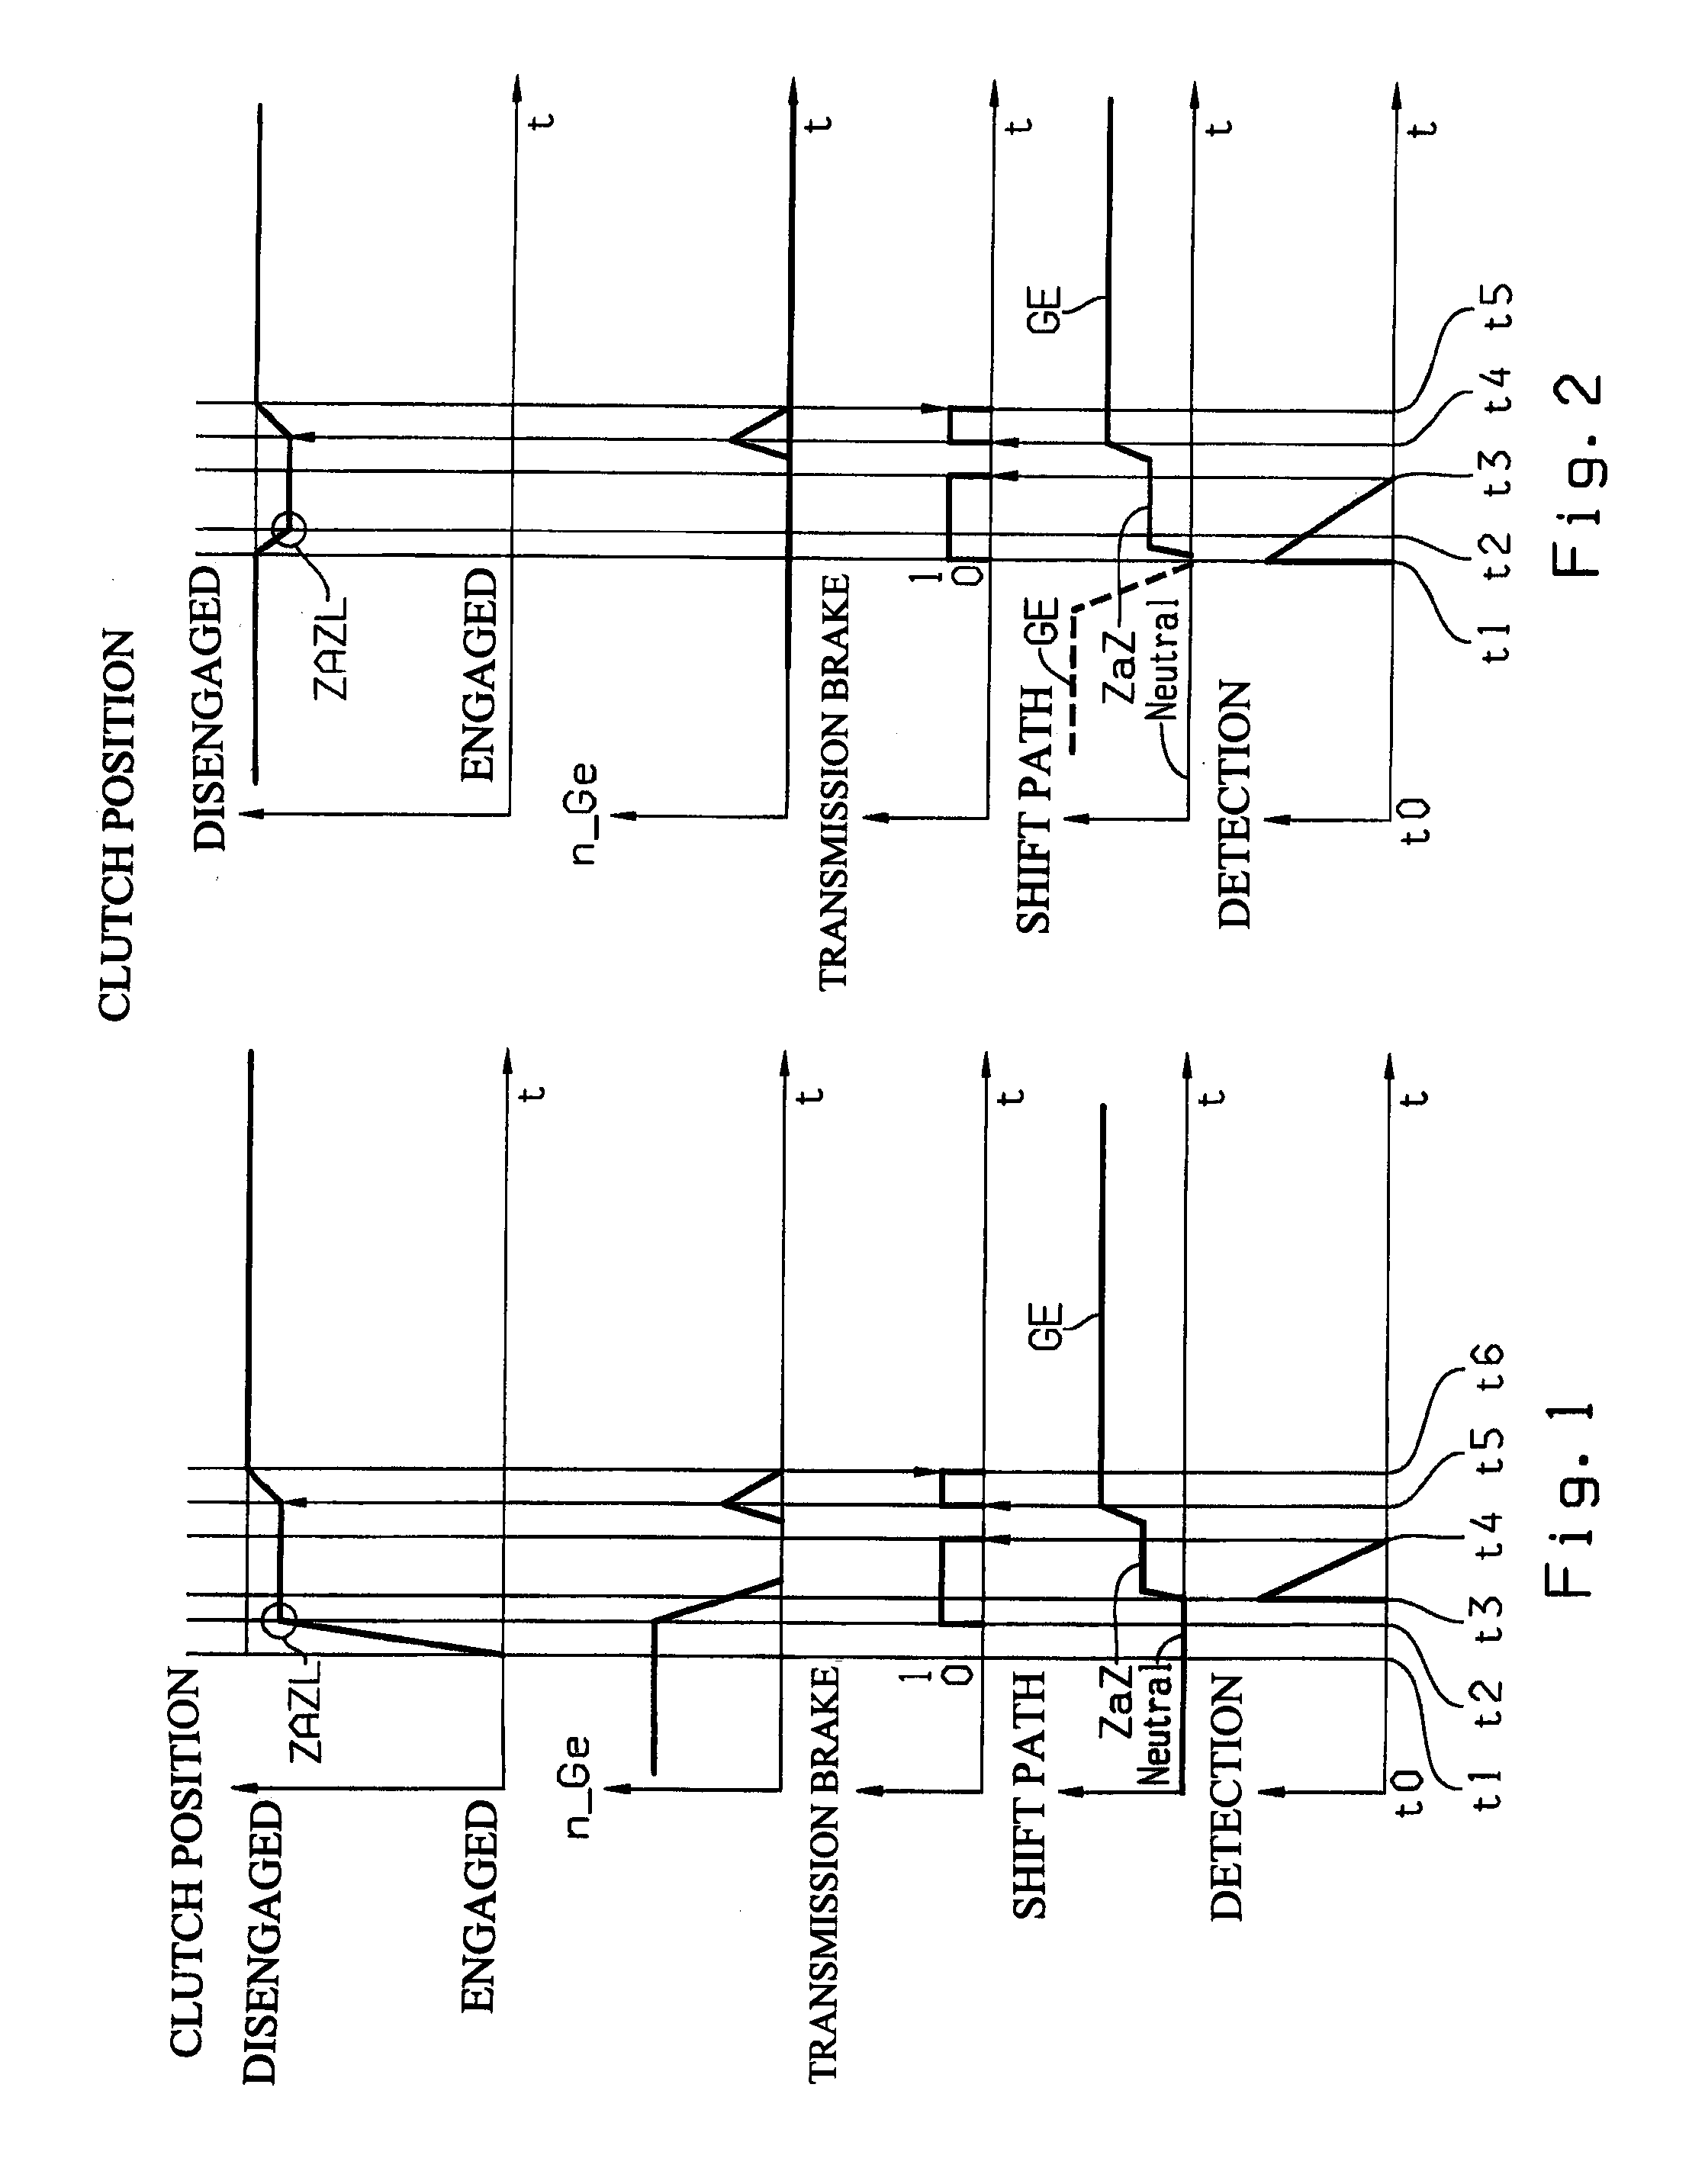 Method for overcoming tooth butt conditions when engaging gears in transmissions